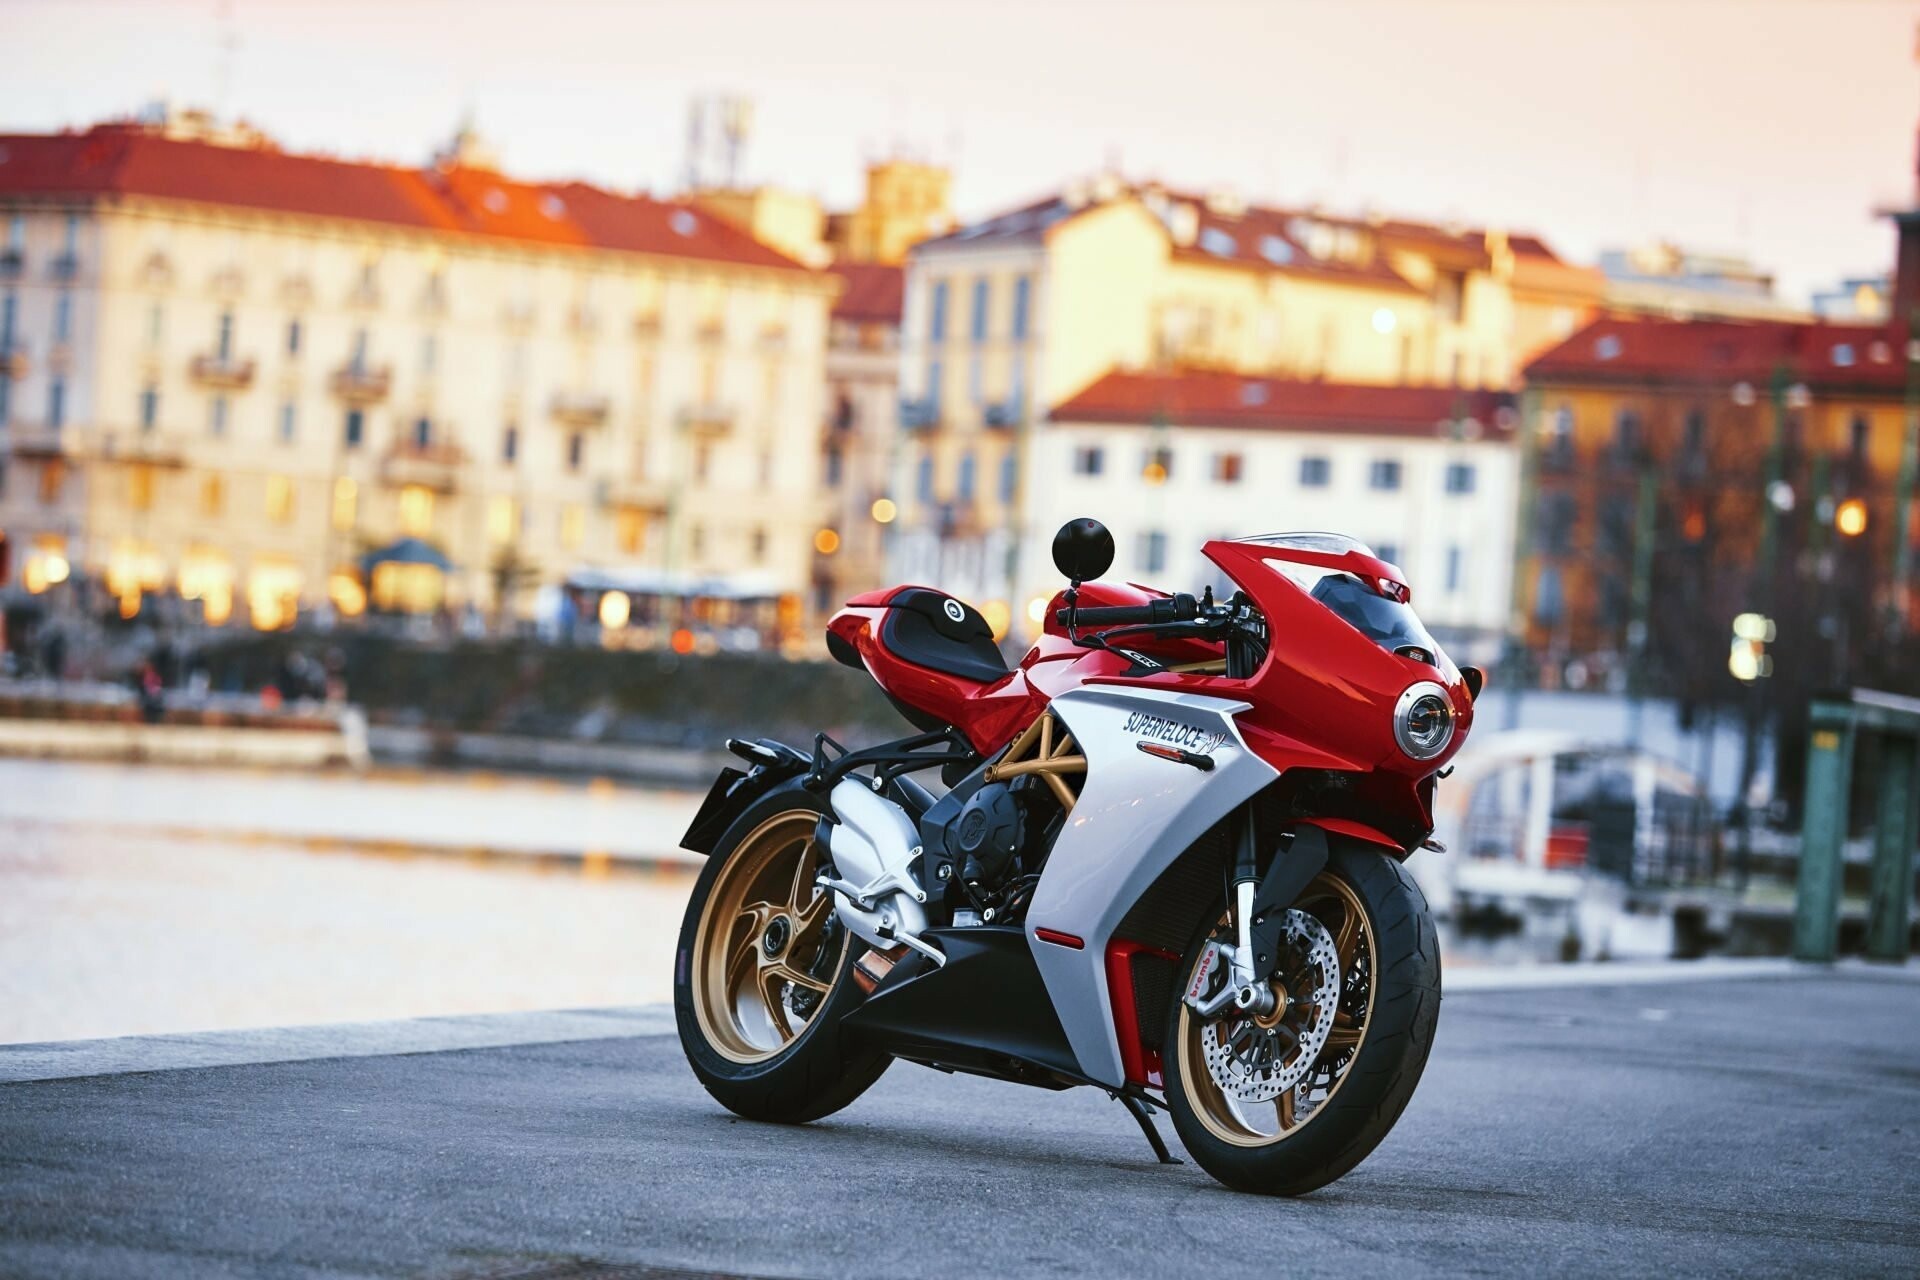 MV Agusta: Superveloce 800, A retro racer styled motorcycle, First exhibited as a concept at the 2018 EICMA Show in Milan. 1920x1280 HD Wallpaper.